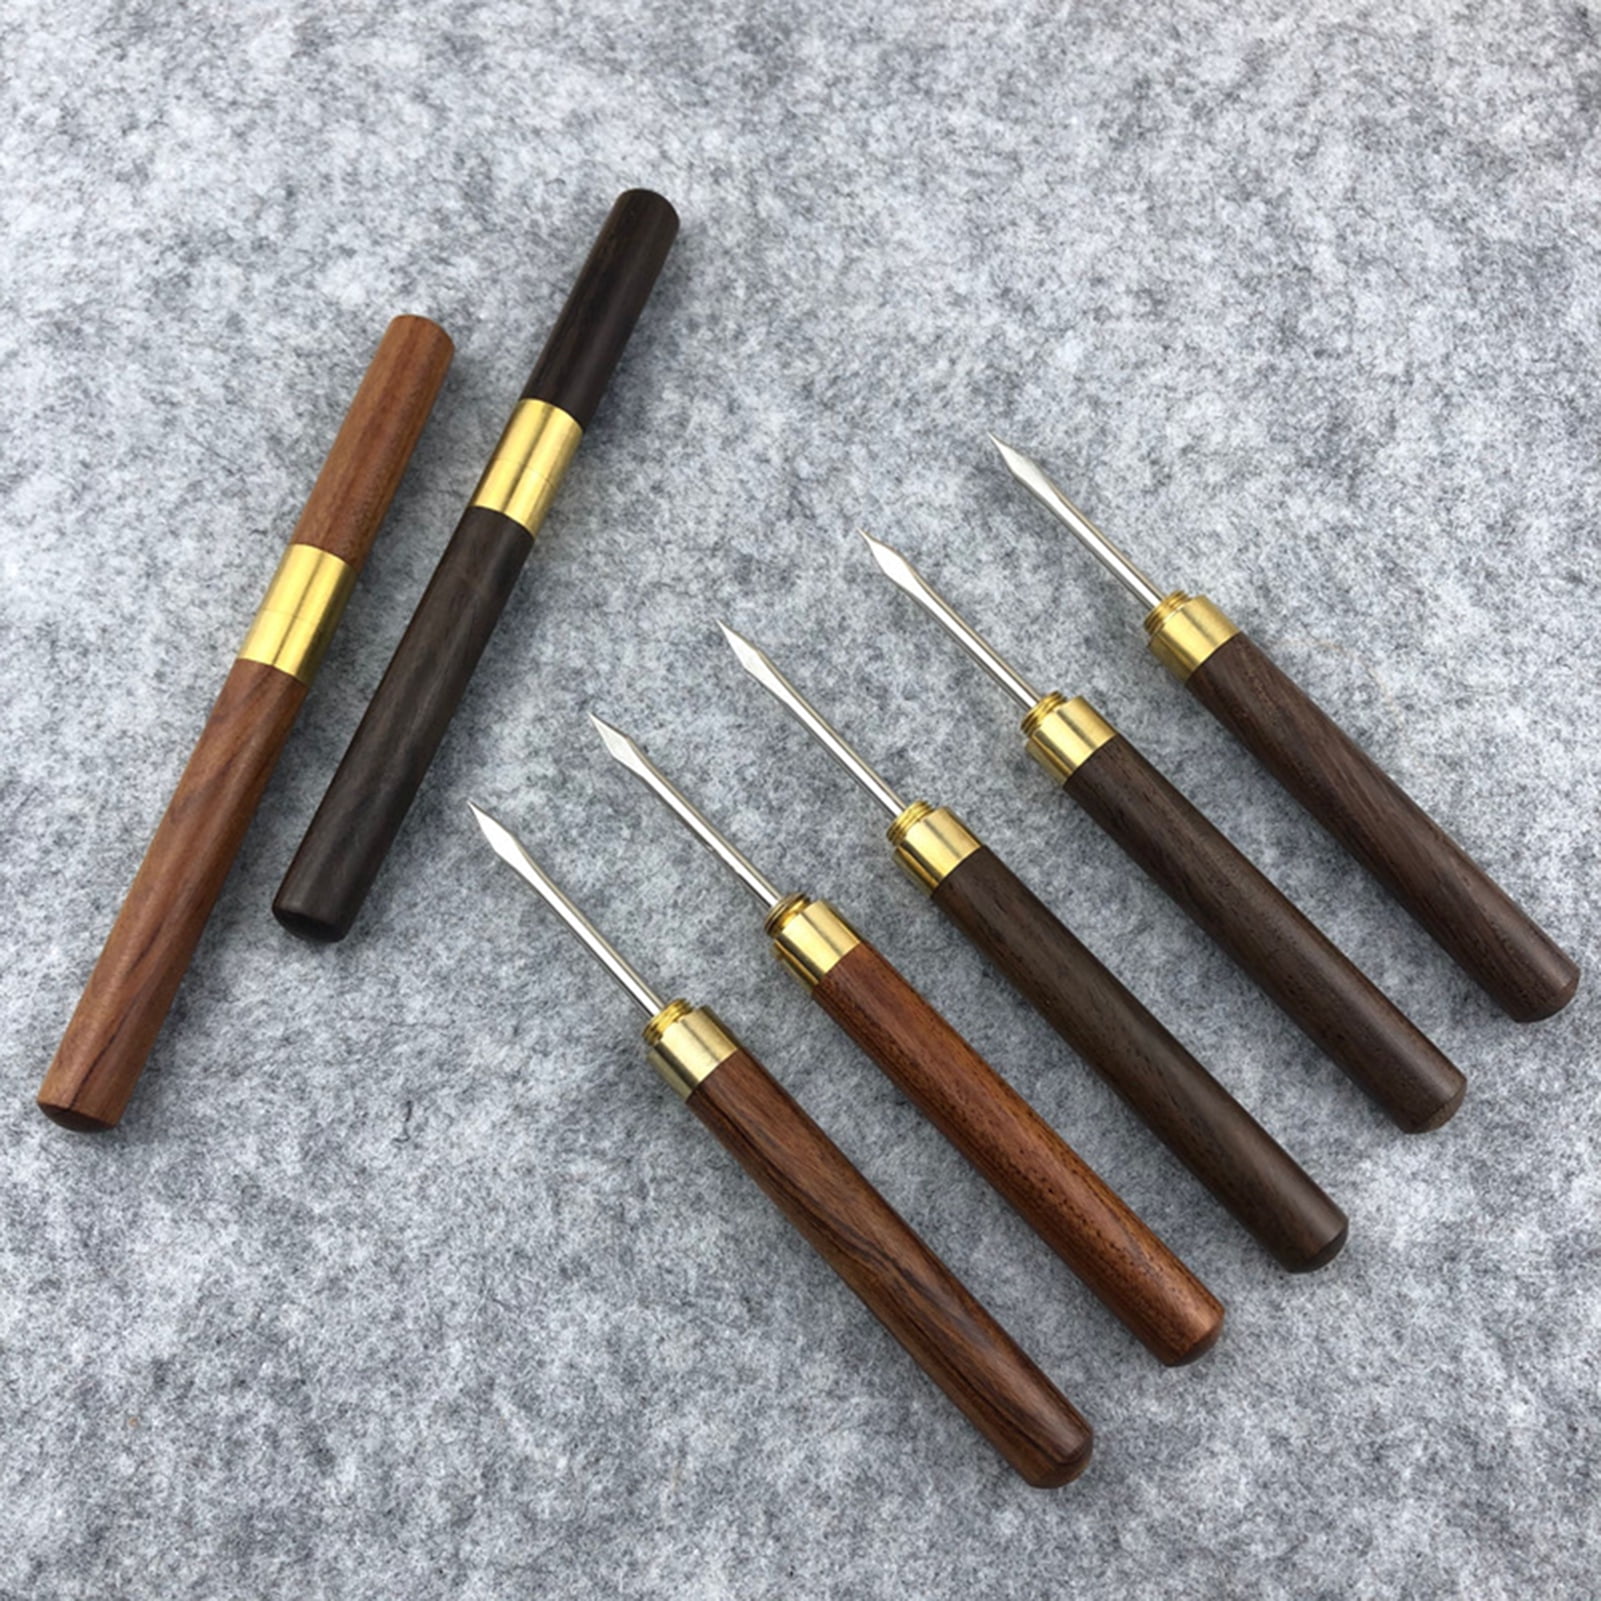 Stainless Steel Ice Pick,Pick Tool for Breaking Ice, Non-slip Wooden Handle  for Easy to Grip - rosewood 